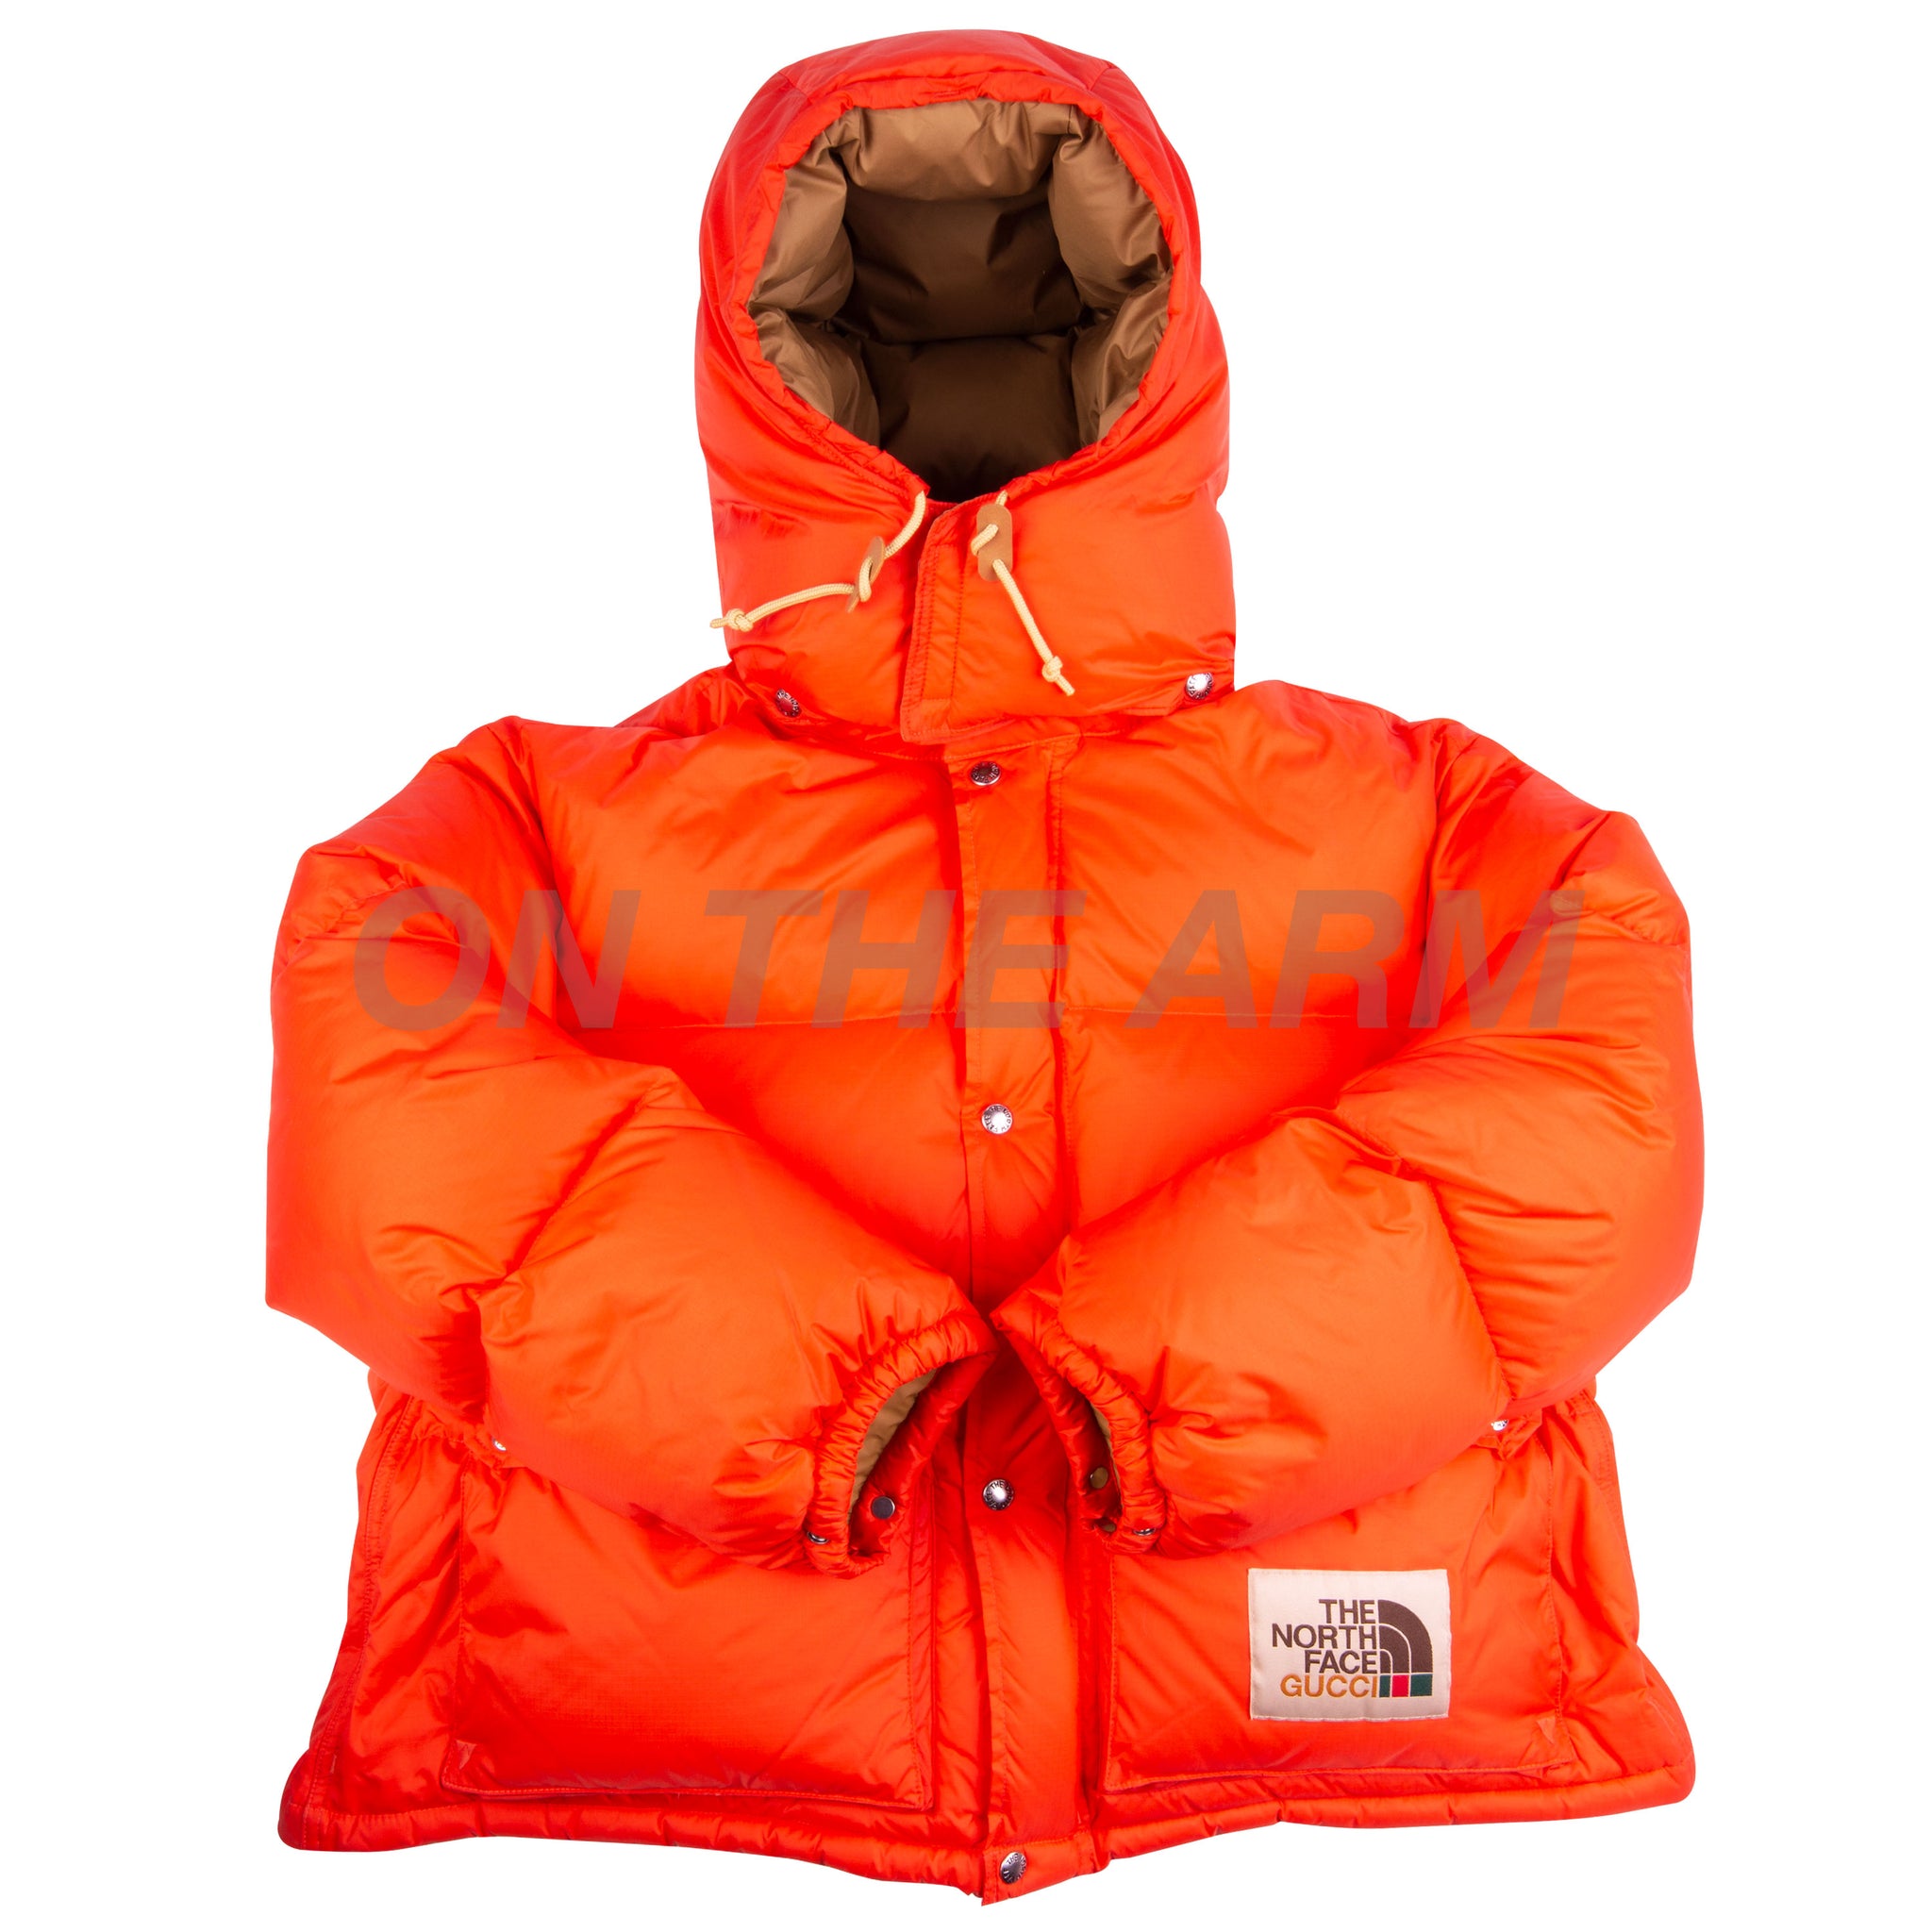 The North Face Orange Gucci Puffer Jacket